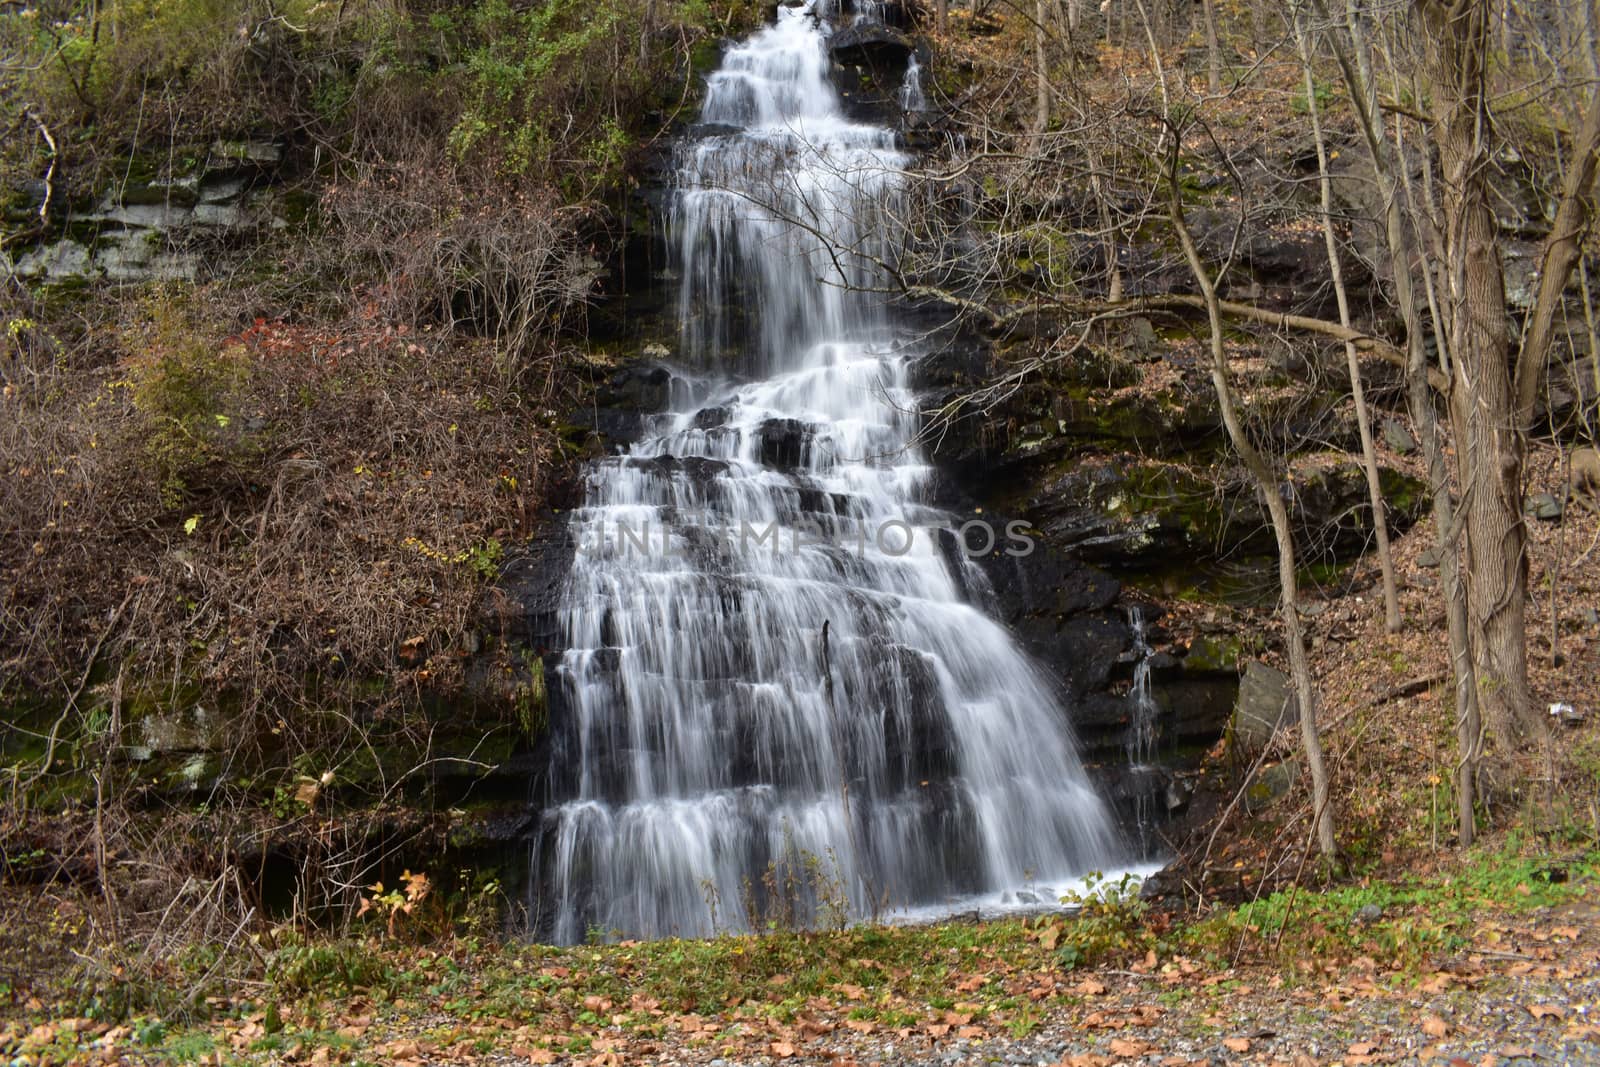 A Small Waterfall Flowing Down a Steep Clif Surrounded by Dead Trees and Foliage